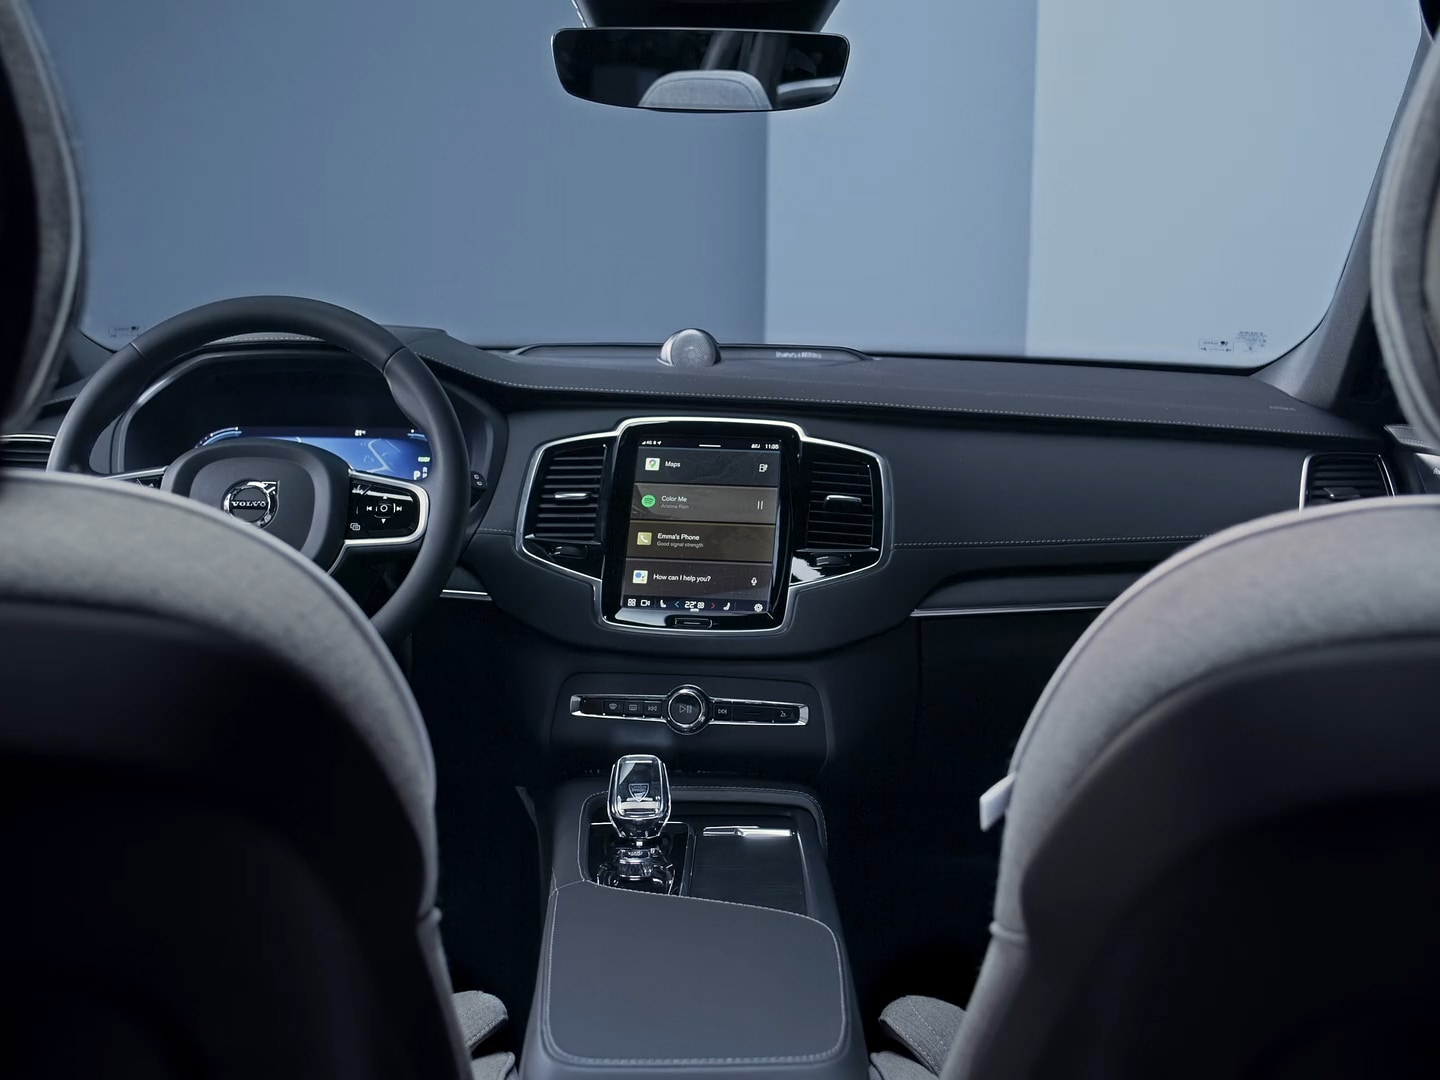 The Volvo XC90 Recharge plug-in hybrid’s steering wheel, instrument panel, infotainment touchscreen and center console.